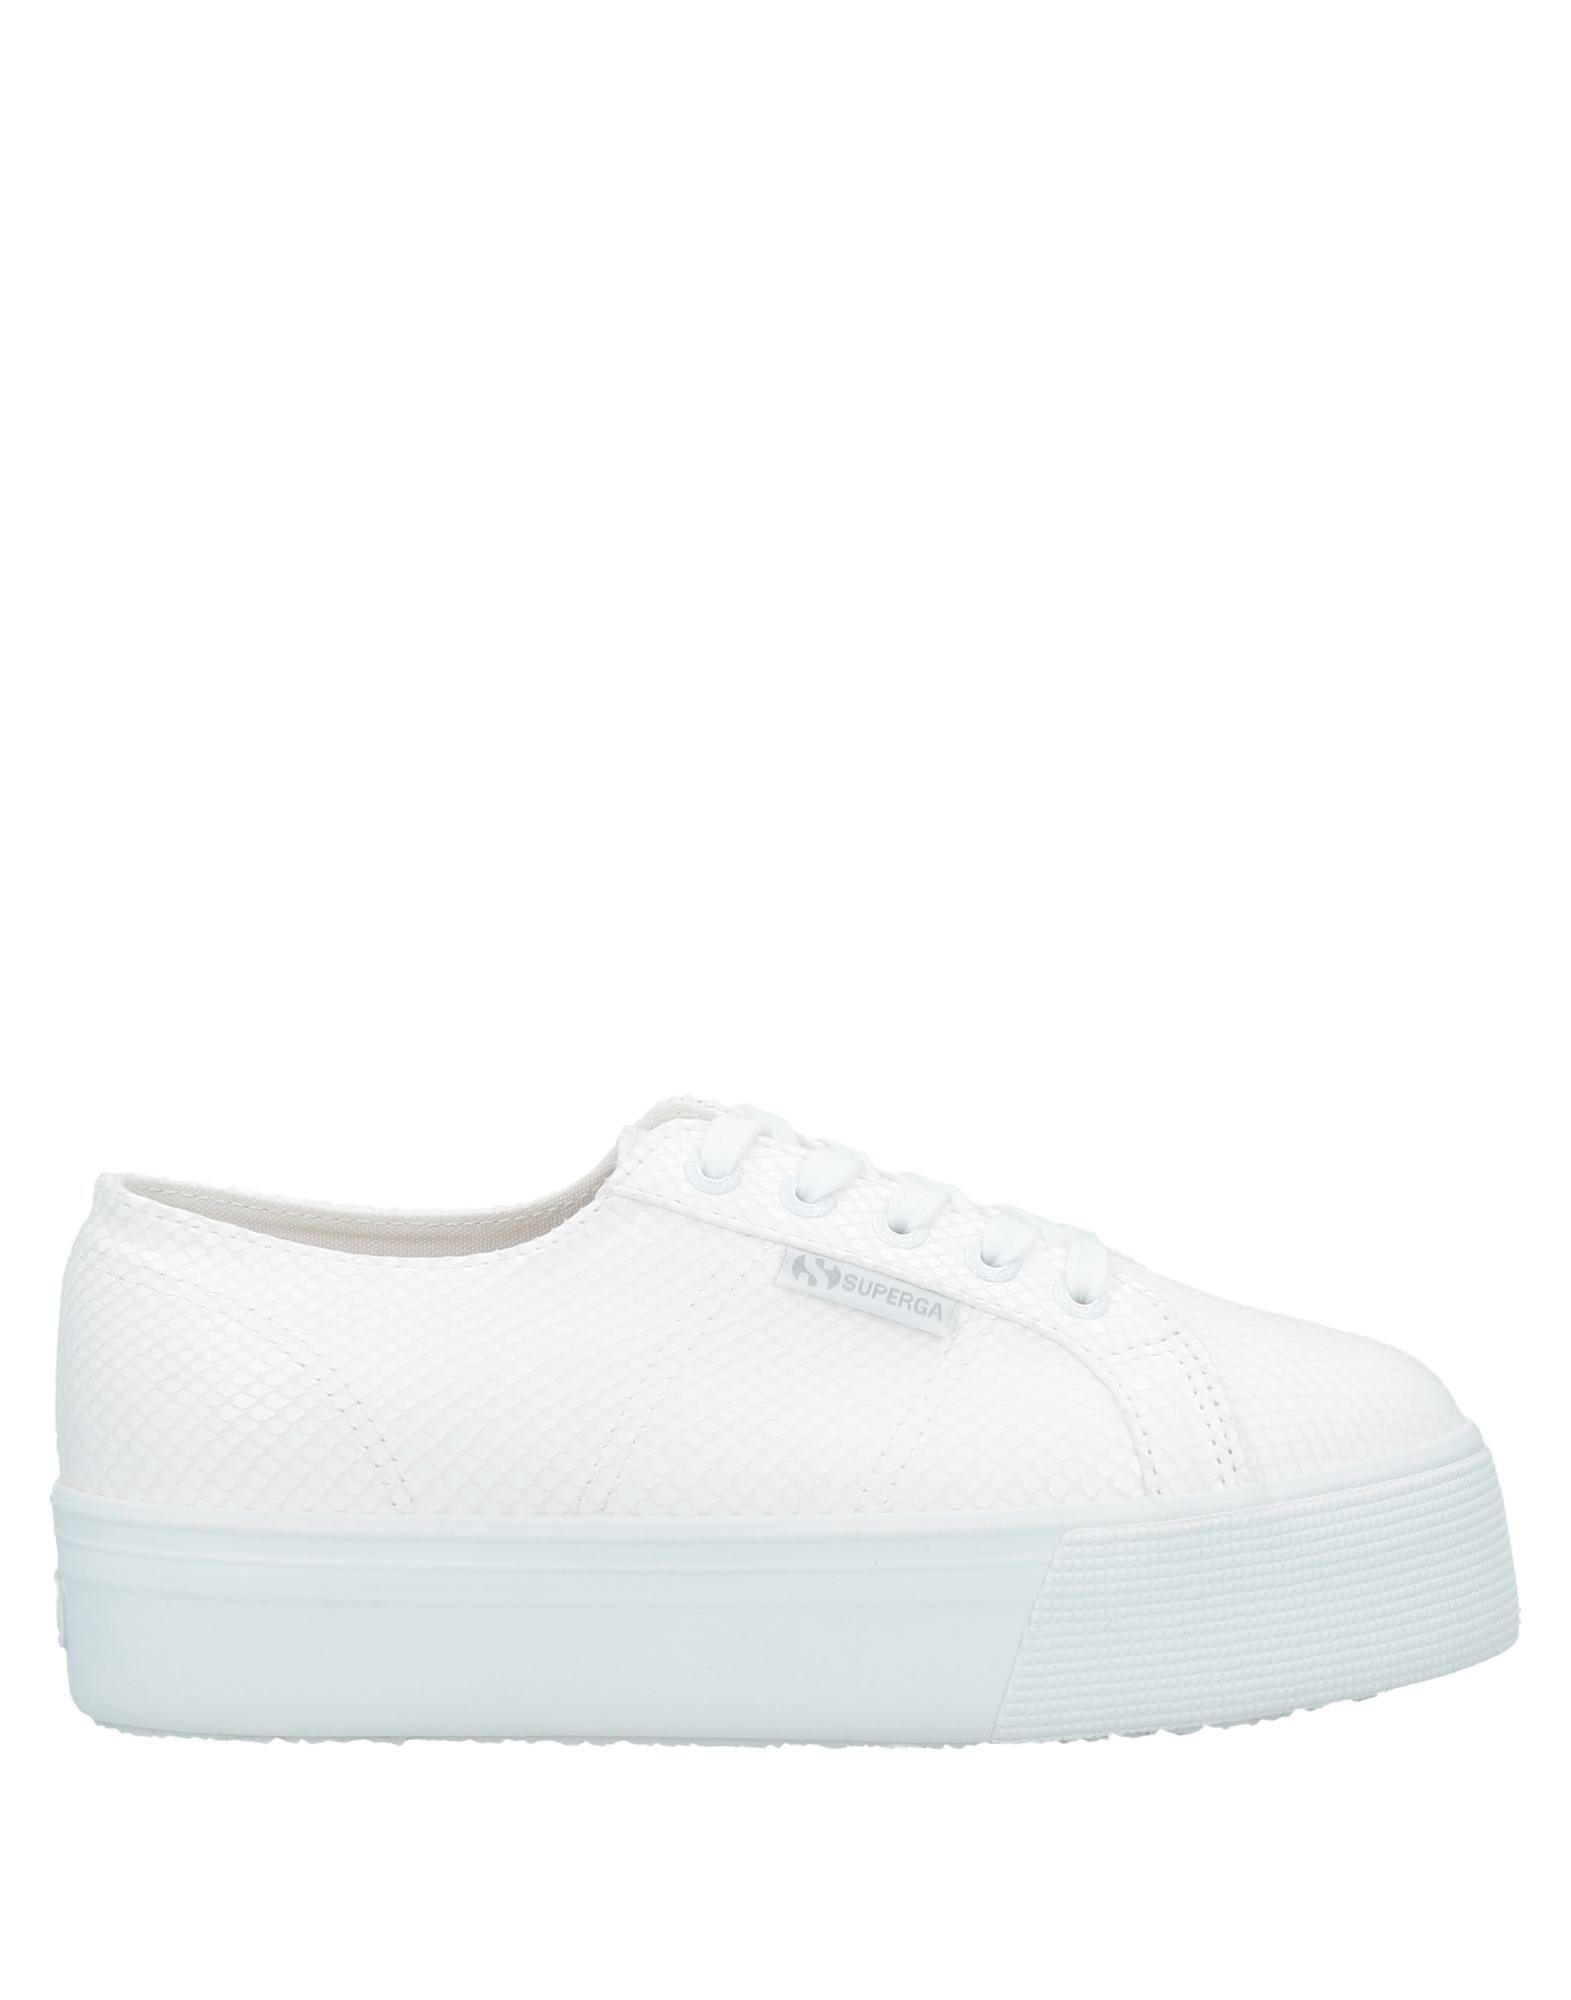 Superga Sneakers In Ivory